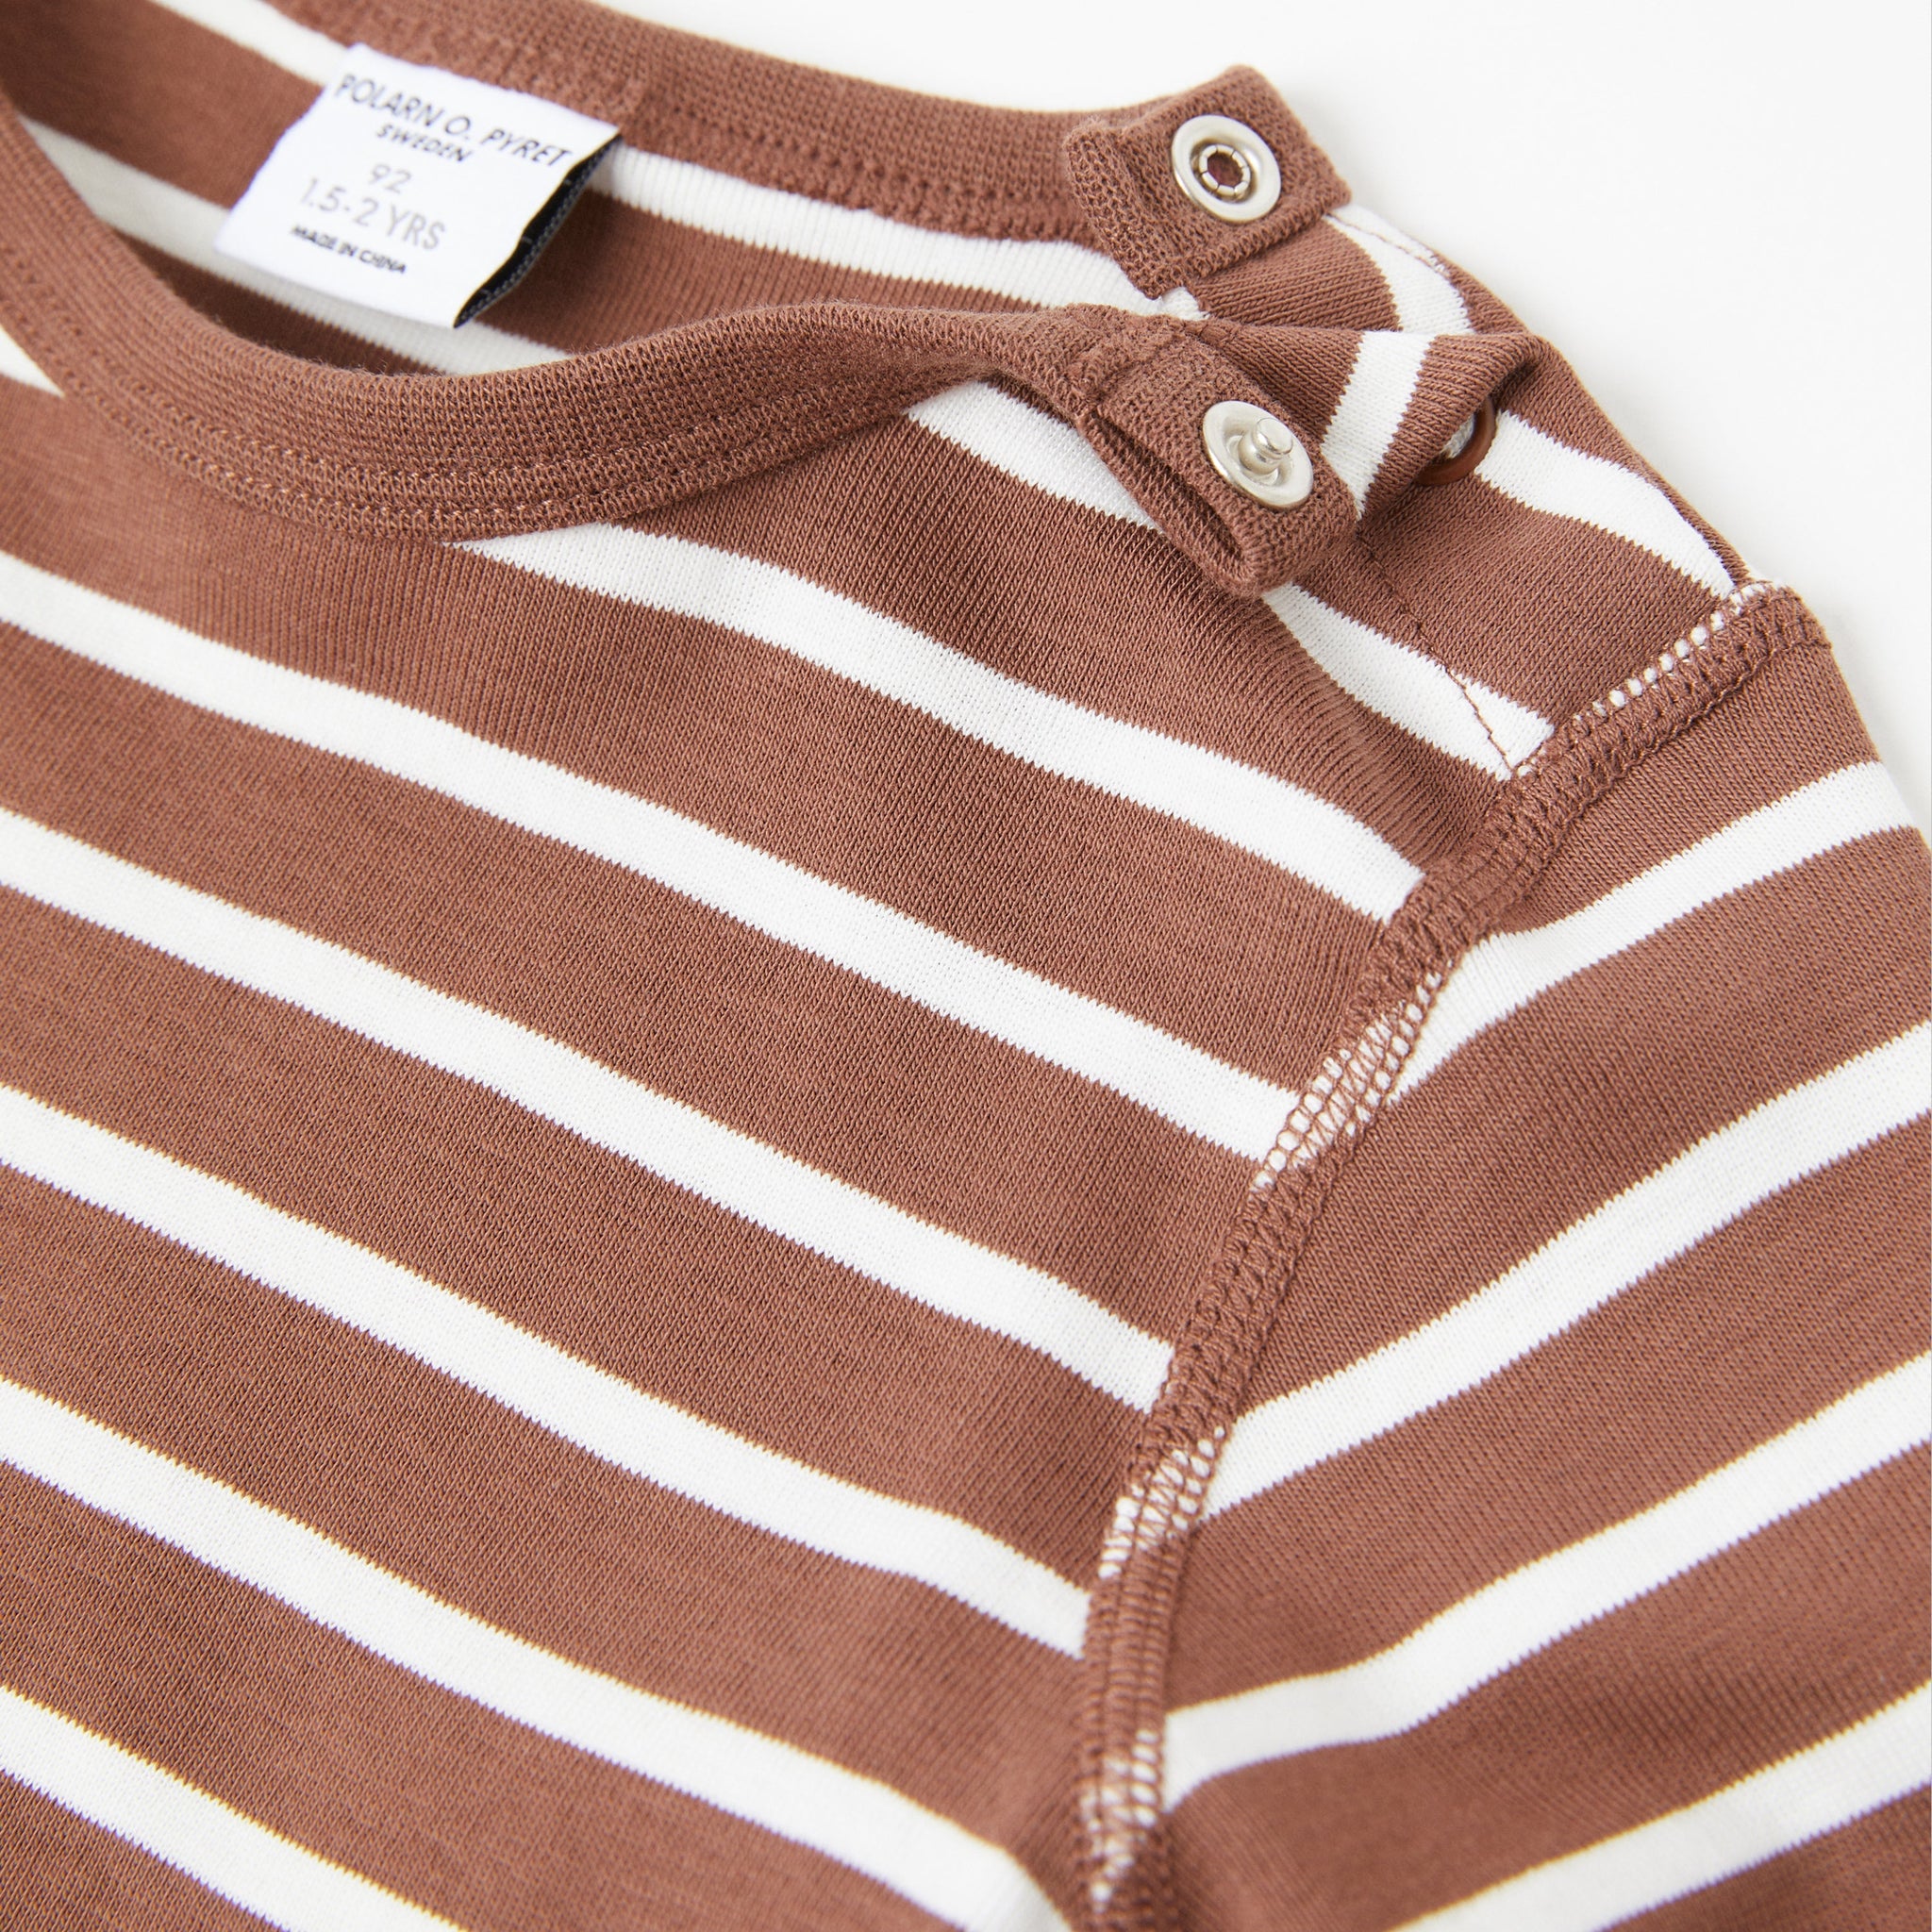 Organic Cotton Striped Brown Kids Top from the Polarn O. Pyret Kidswear collection. Clothes made using sustainably sourced materials.